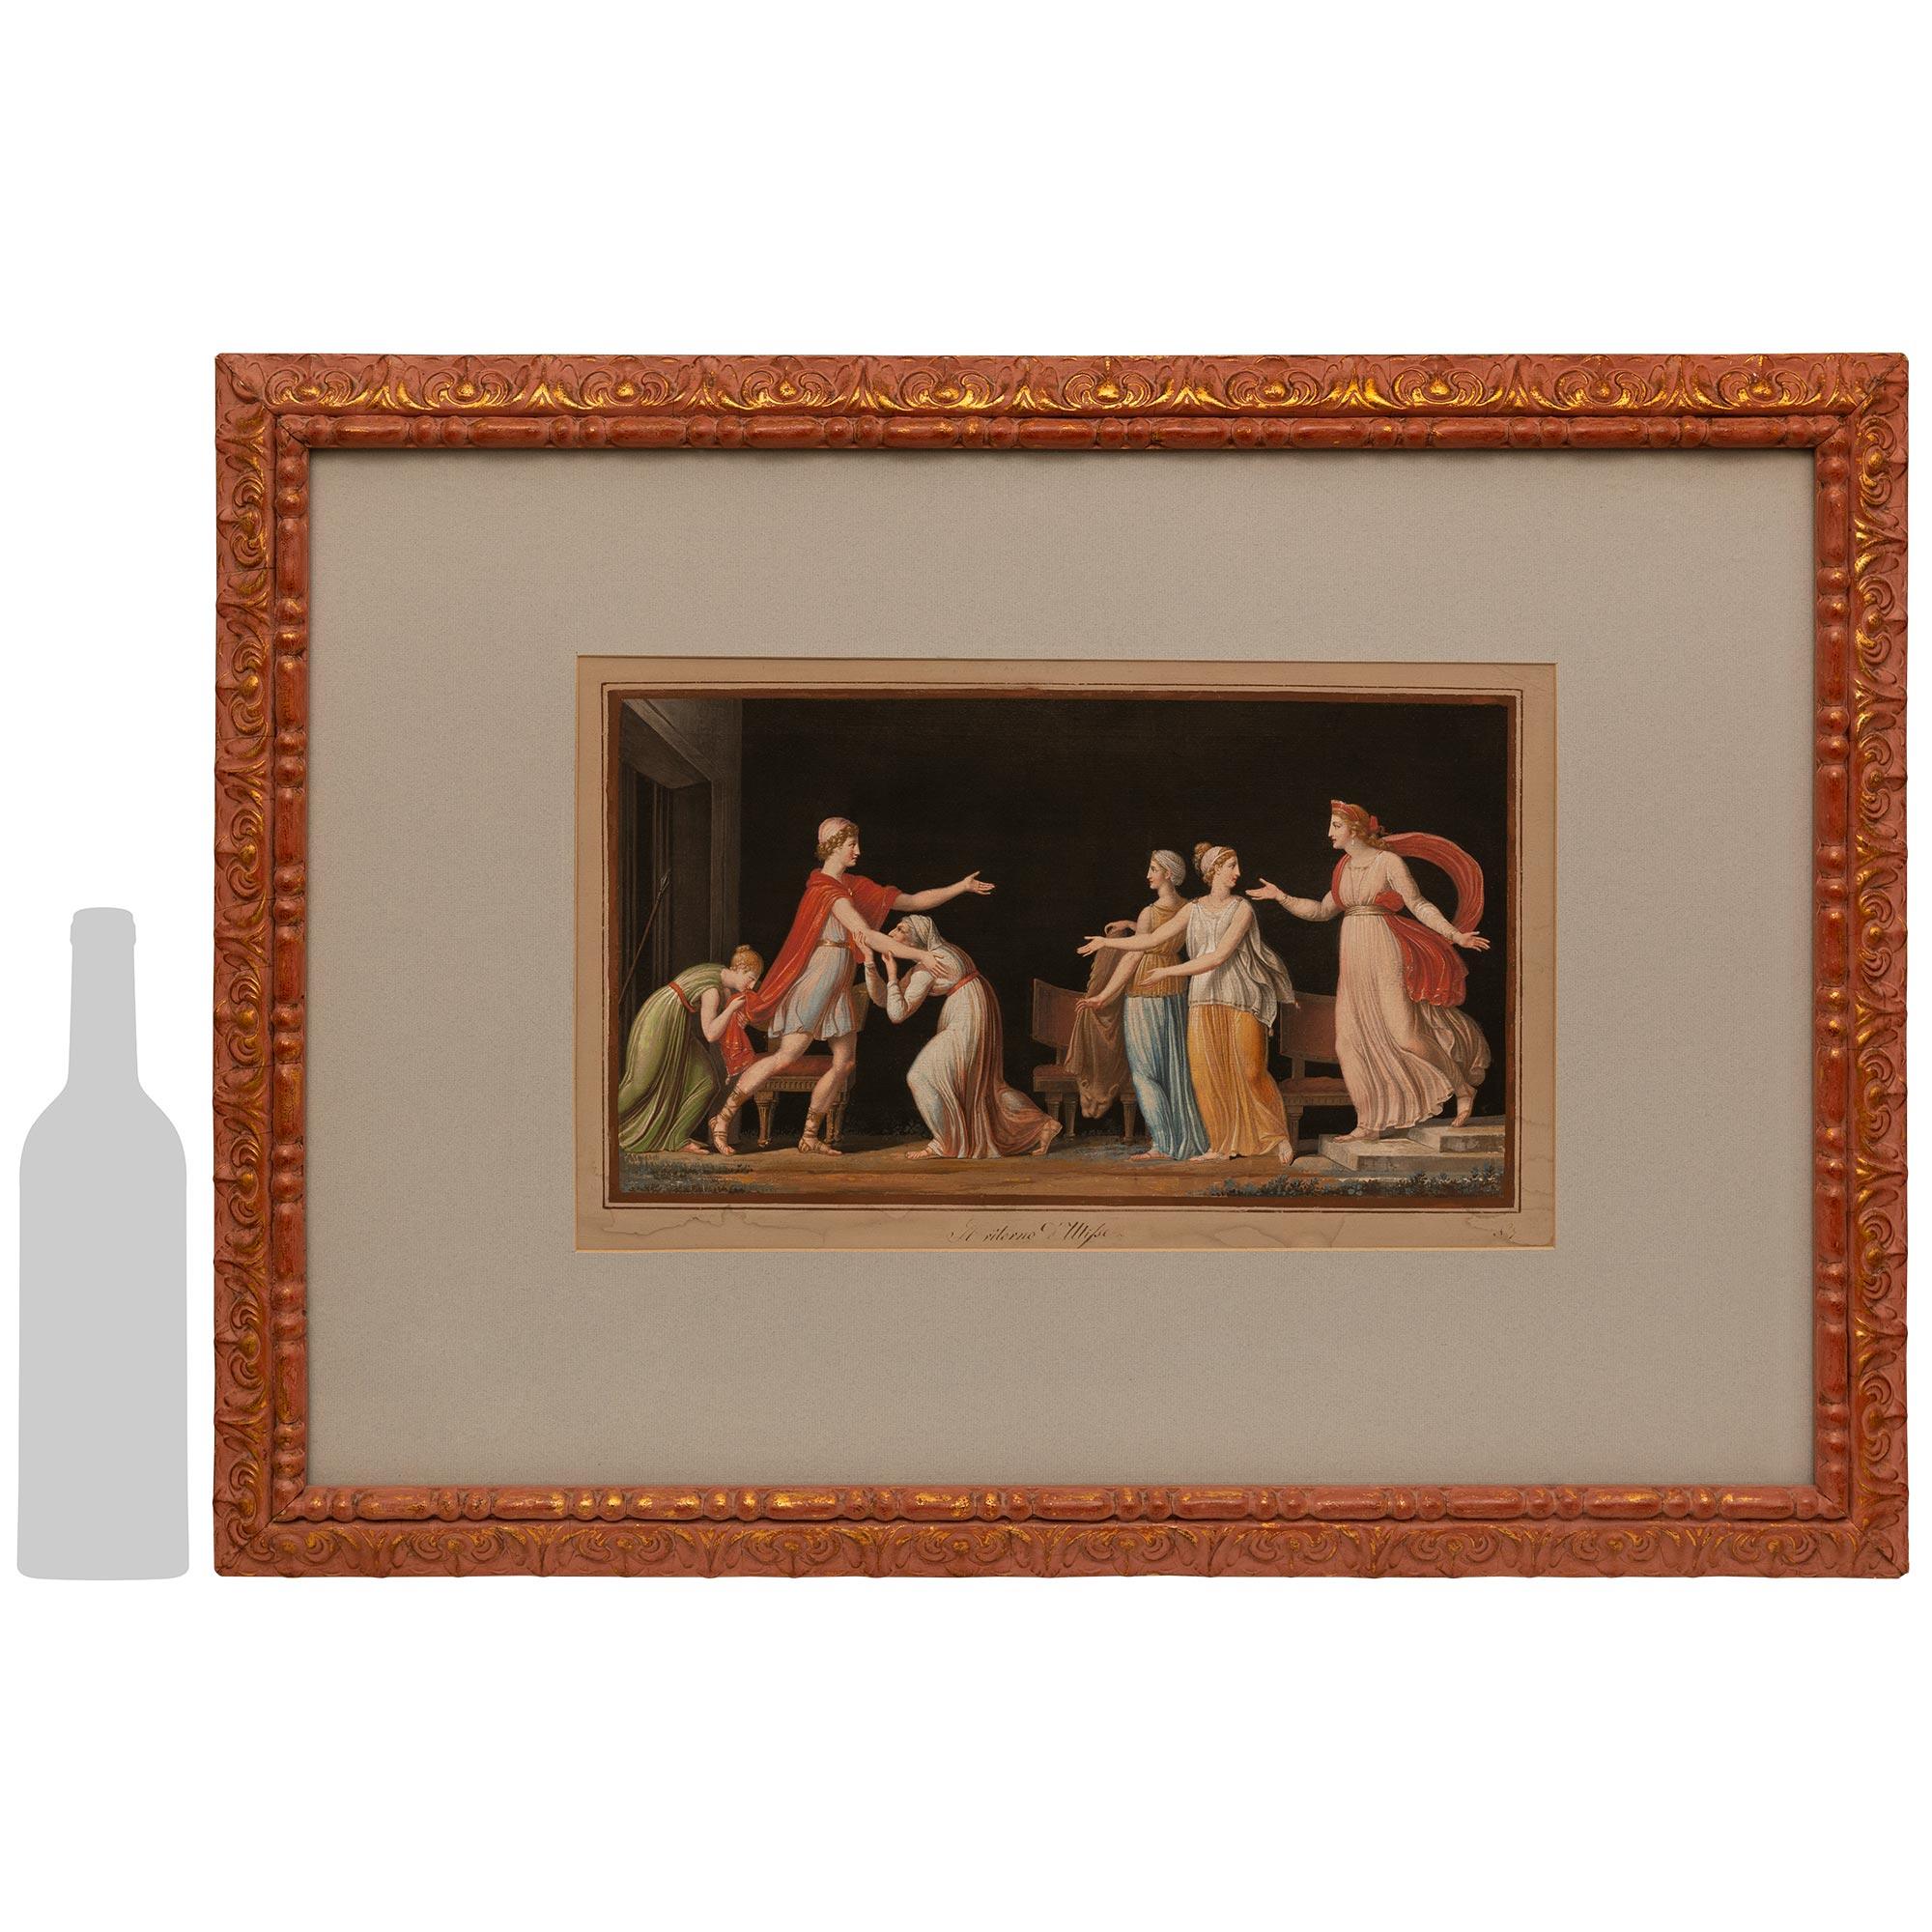 An important and high quality Italian early 19th century Neo-Classical st. Gilt and patinated wood Gouache, by Maestri Michelangelo. This beautiful Gouache is framed within a rectangular patinated and gilt frame decorated with scrolling foliate